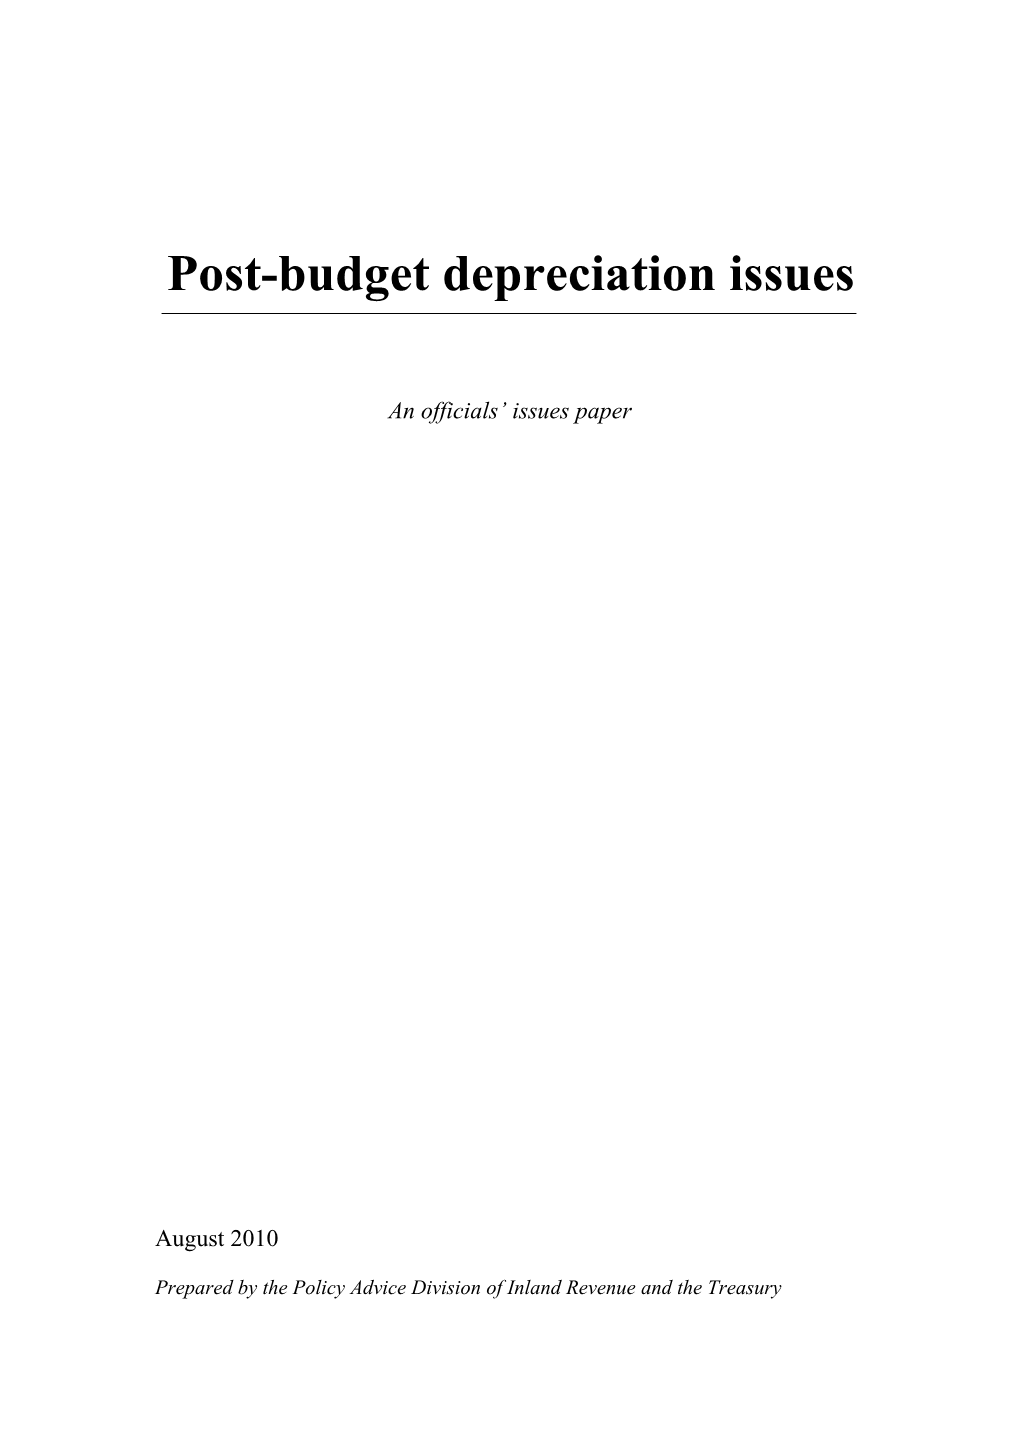 Post-Budget Depreciation Issues: an Officials' Issues Paper